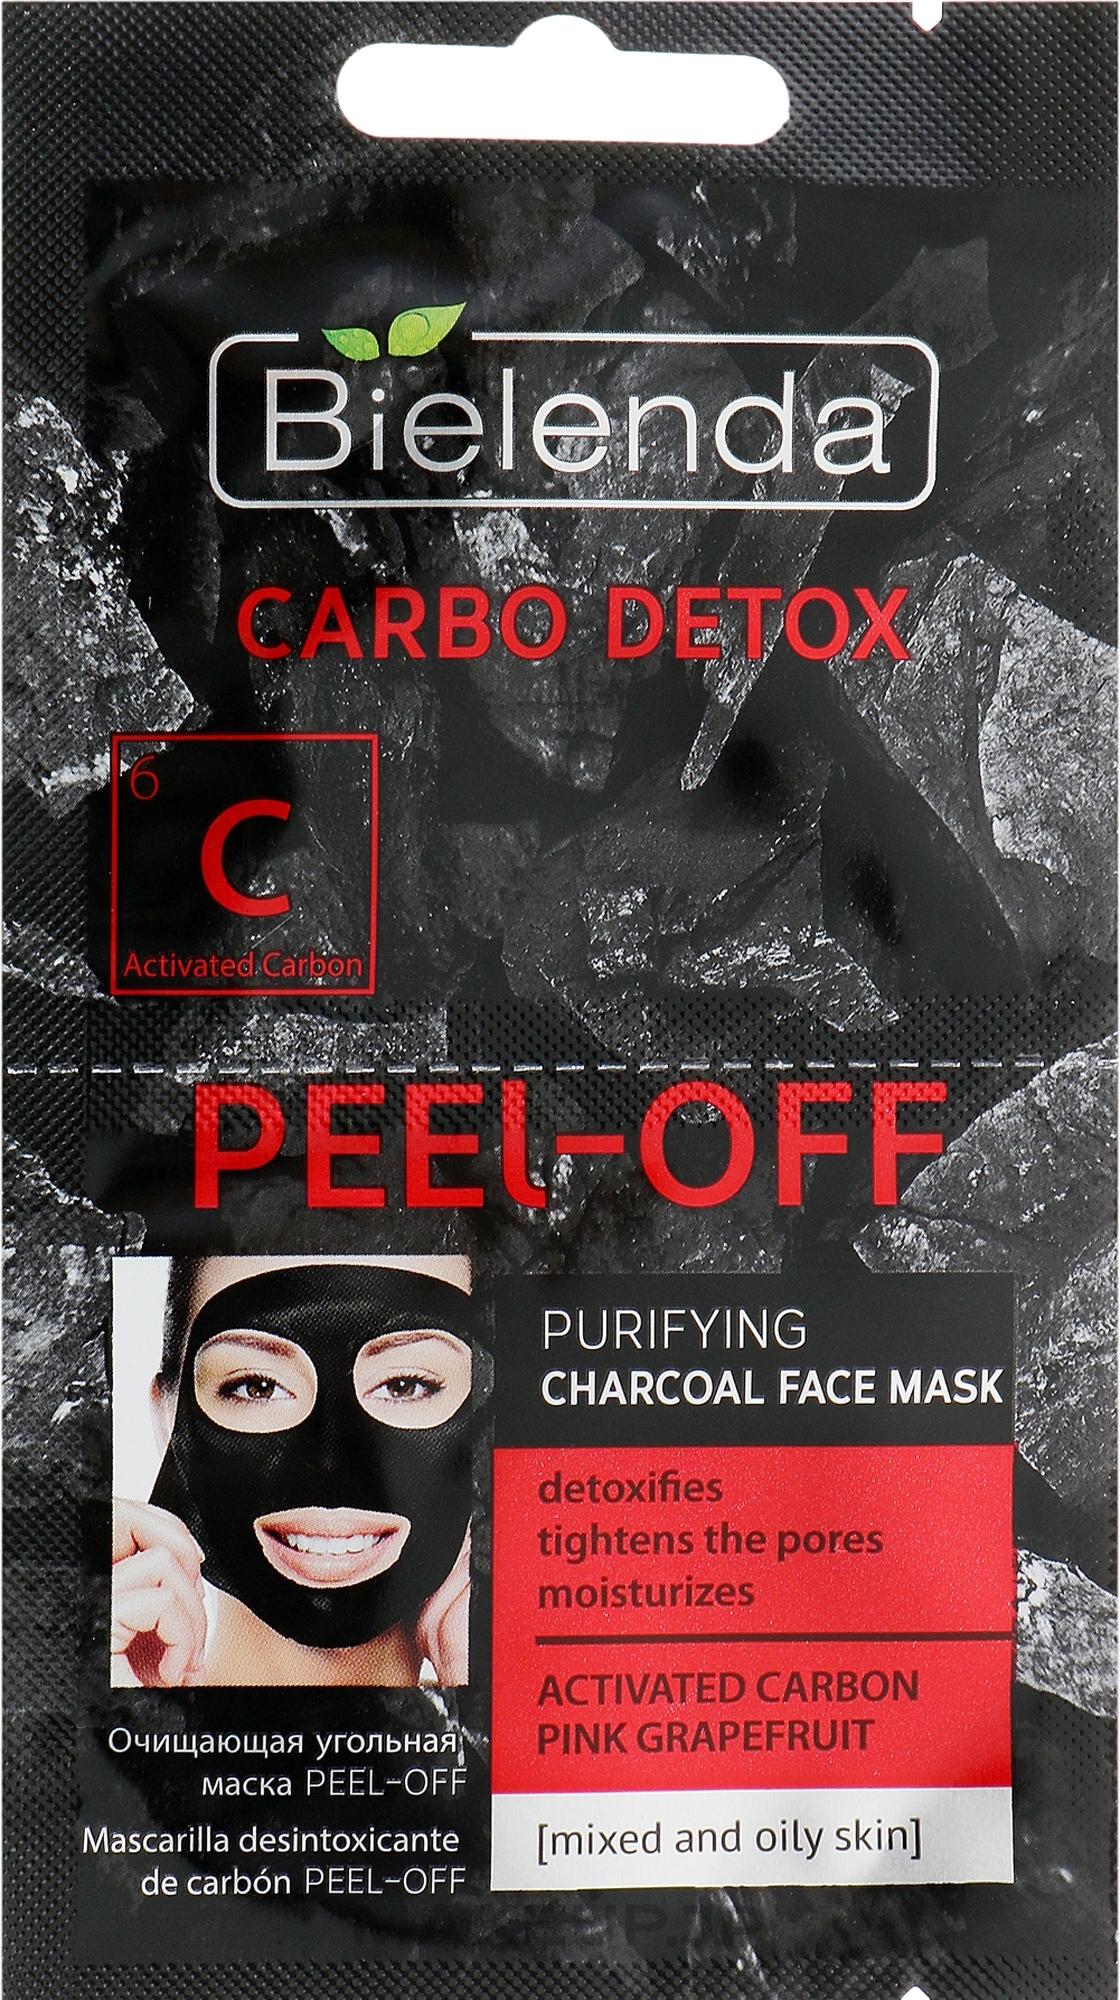 Cleansing Charcoal Mask - Bielenda Carbo Detox Peel-Off Purifying Charcoal Mask — photo 2 x 6 g